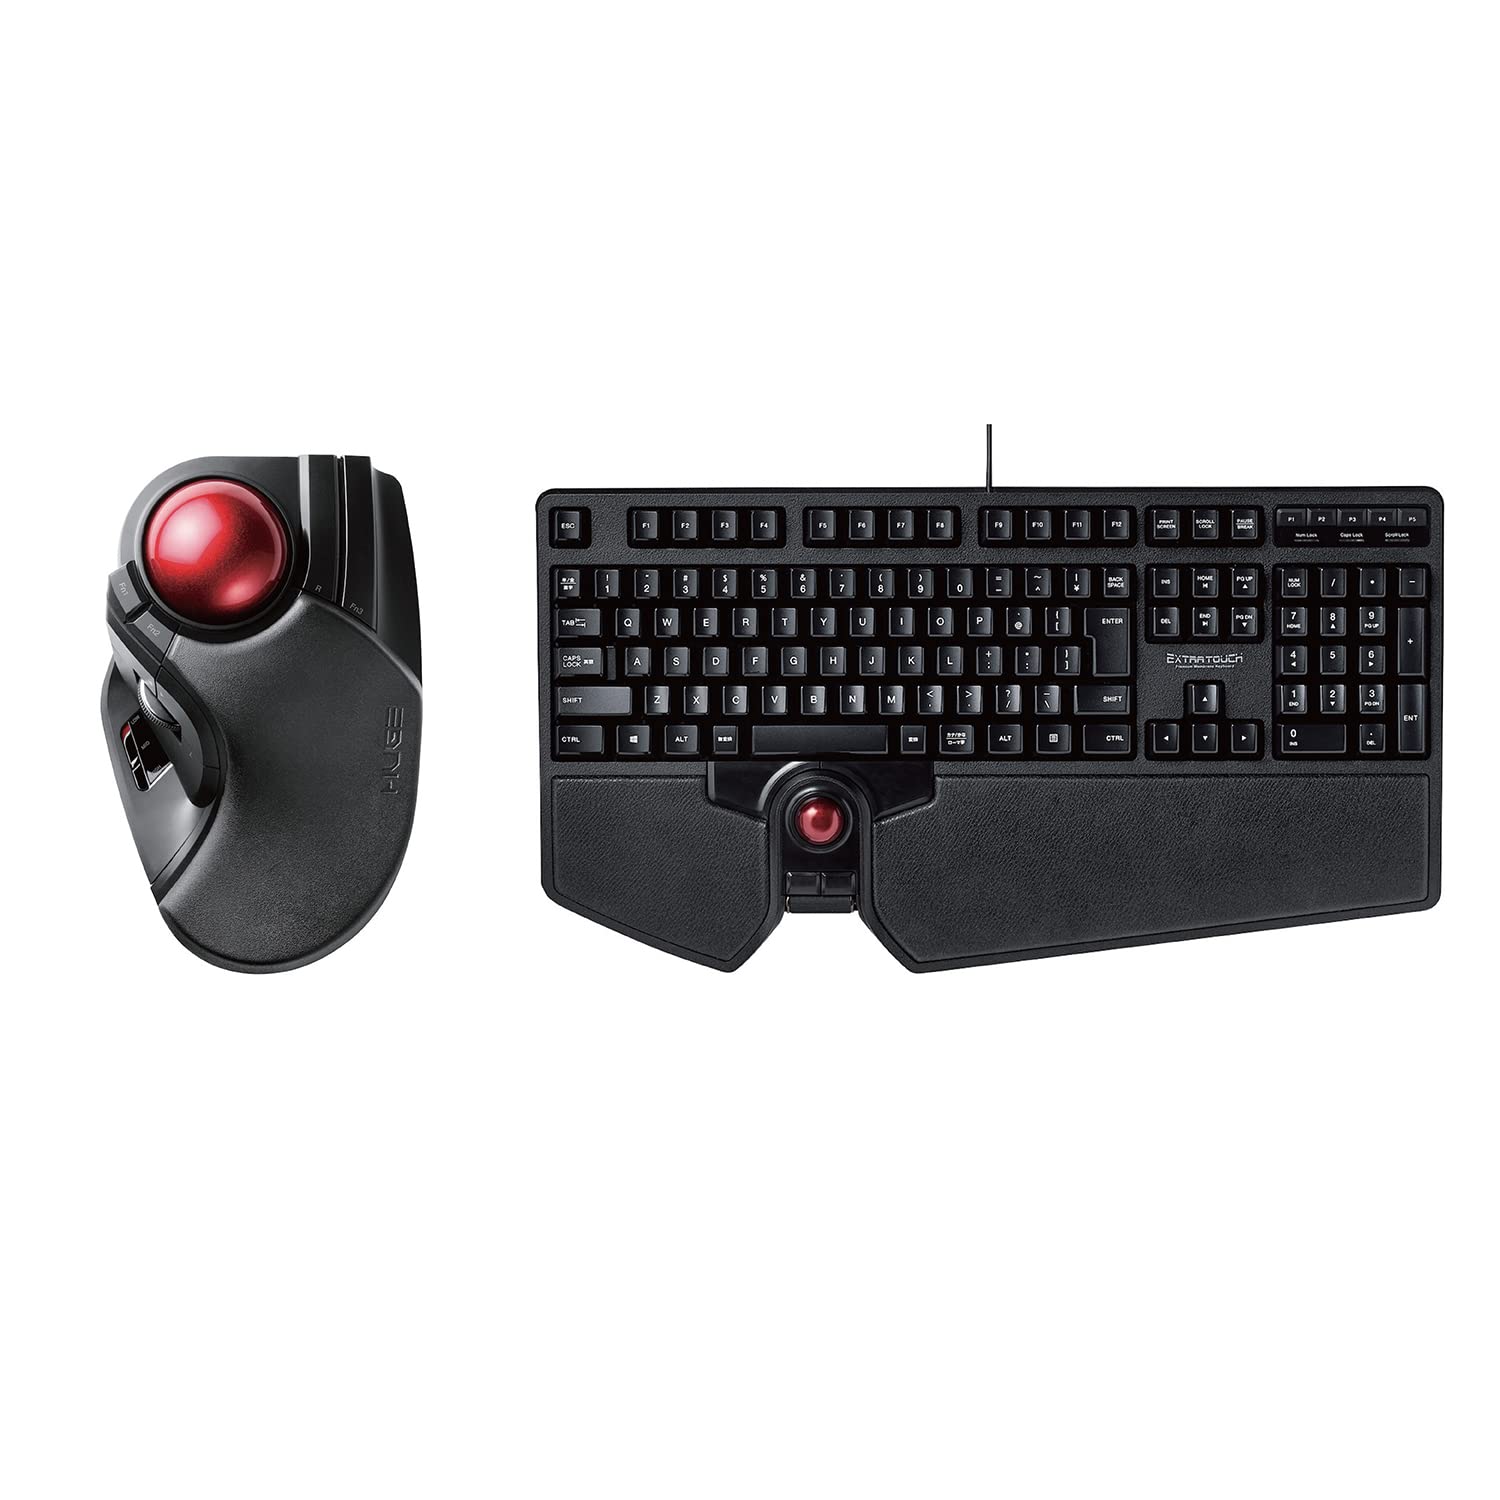 ELECOM 2.4GHz Wireless Finger-Operated Large Size Trackball Mouse & Wired Japanese Layout Keyboard with Built-in Optical Trackball Mouse & Scroll Wheel